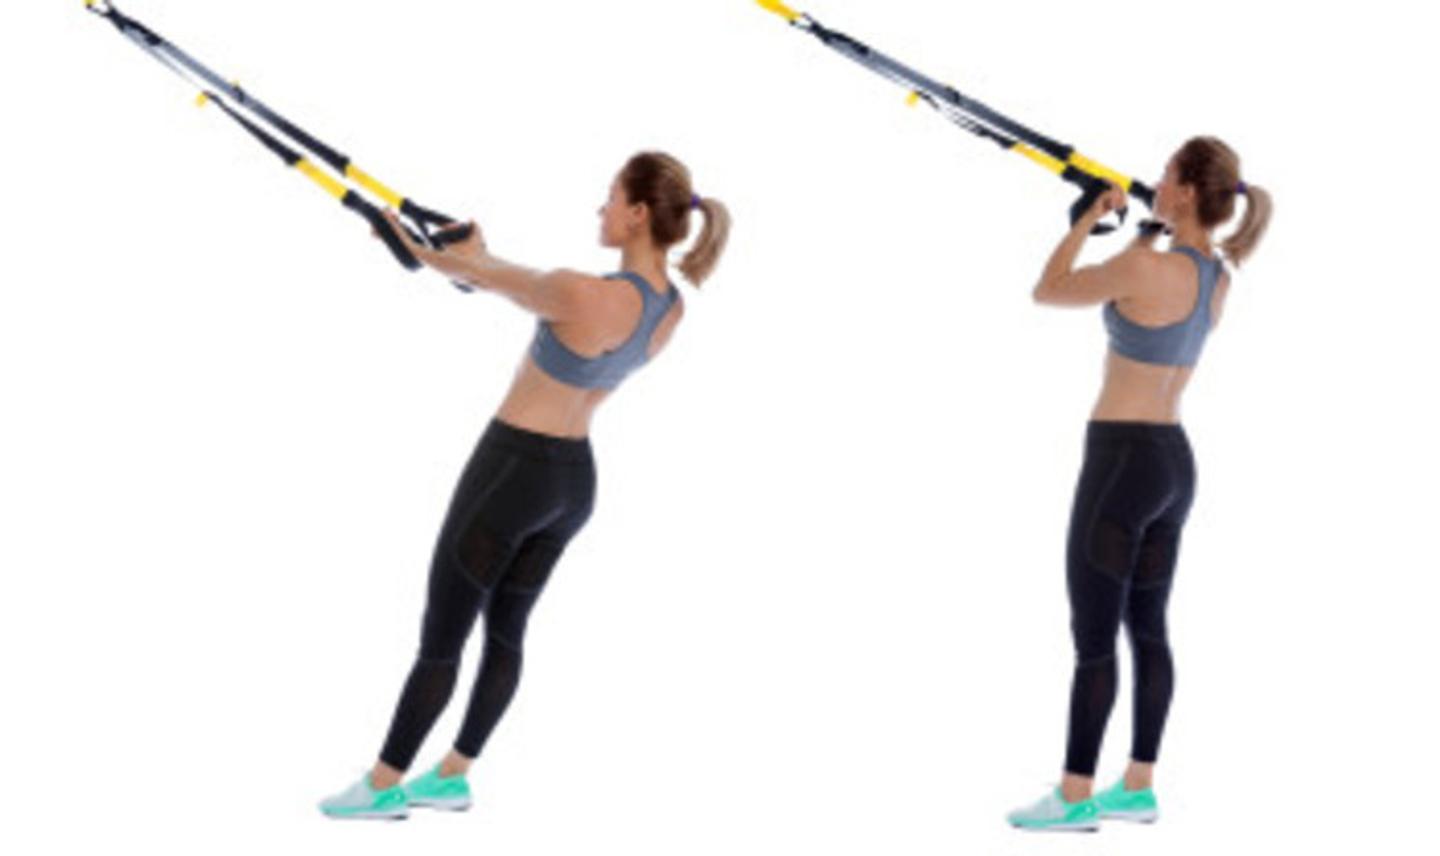 ISSA, International Sports Sciences Association, Certified Personal Trainer, ISSAonline, ISSA x TRX: Best TRX Exercises to Enhance Your Training Biceps Curl